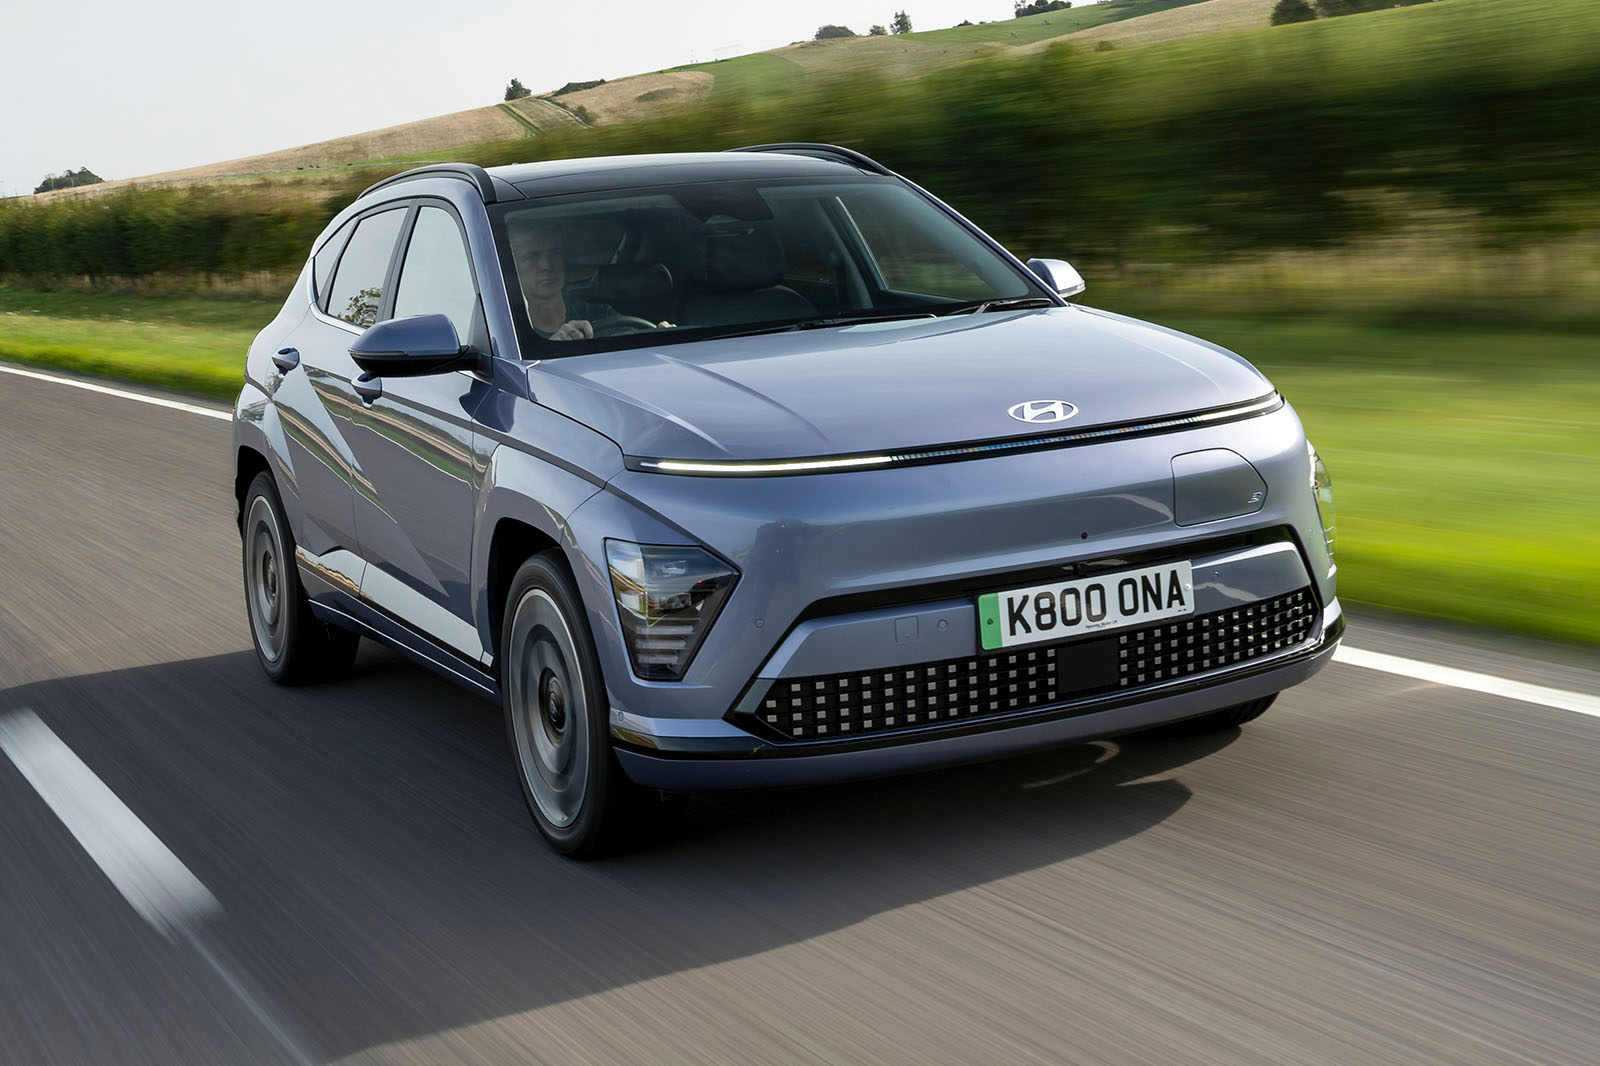 Is the Hyundai Kona the Right SUV for Your Road Trip?